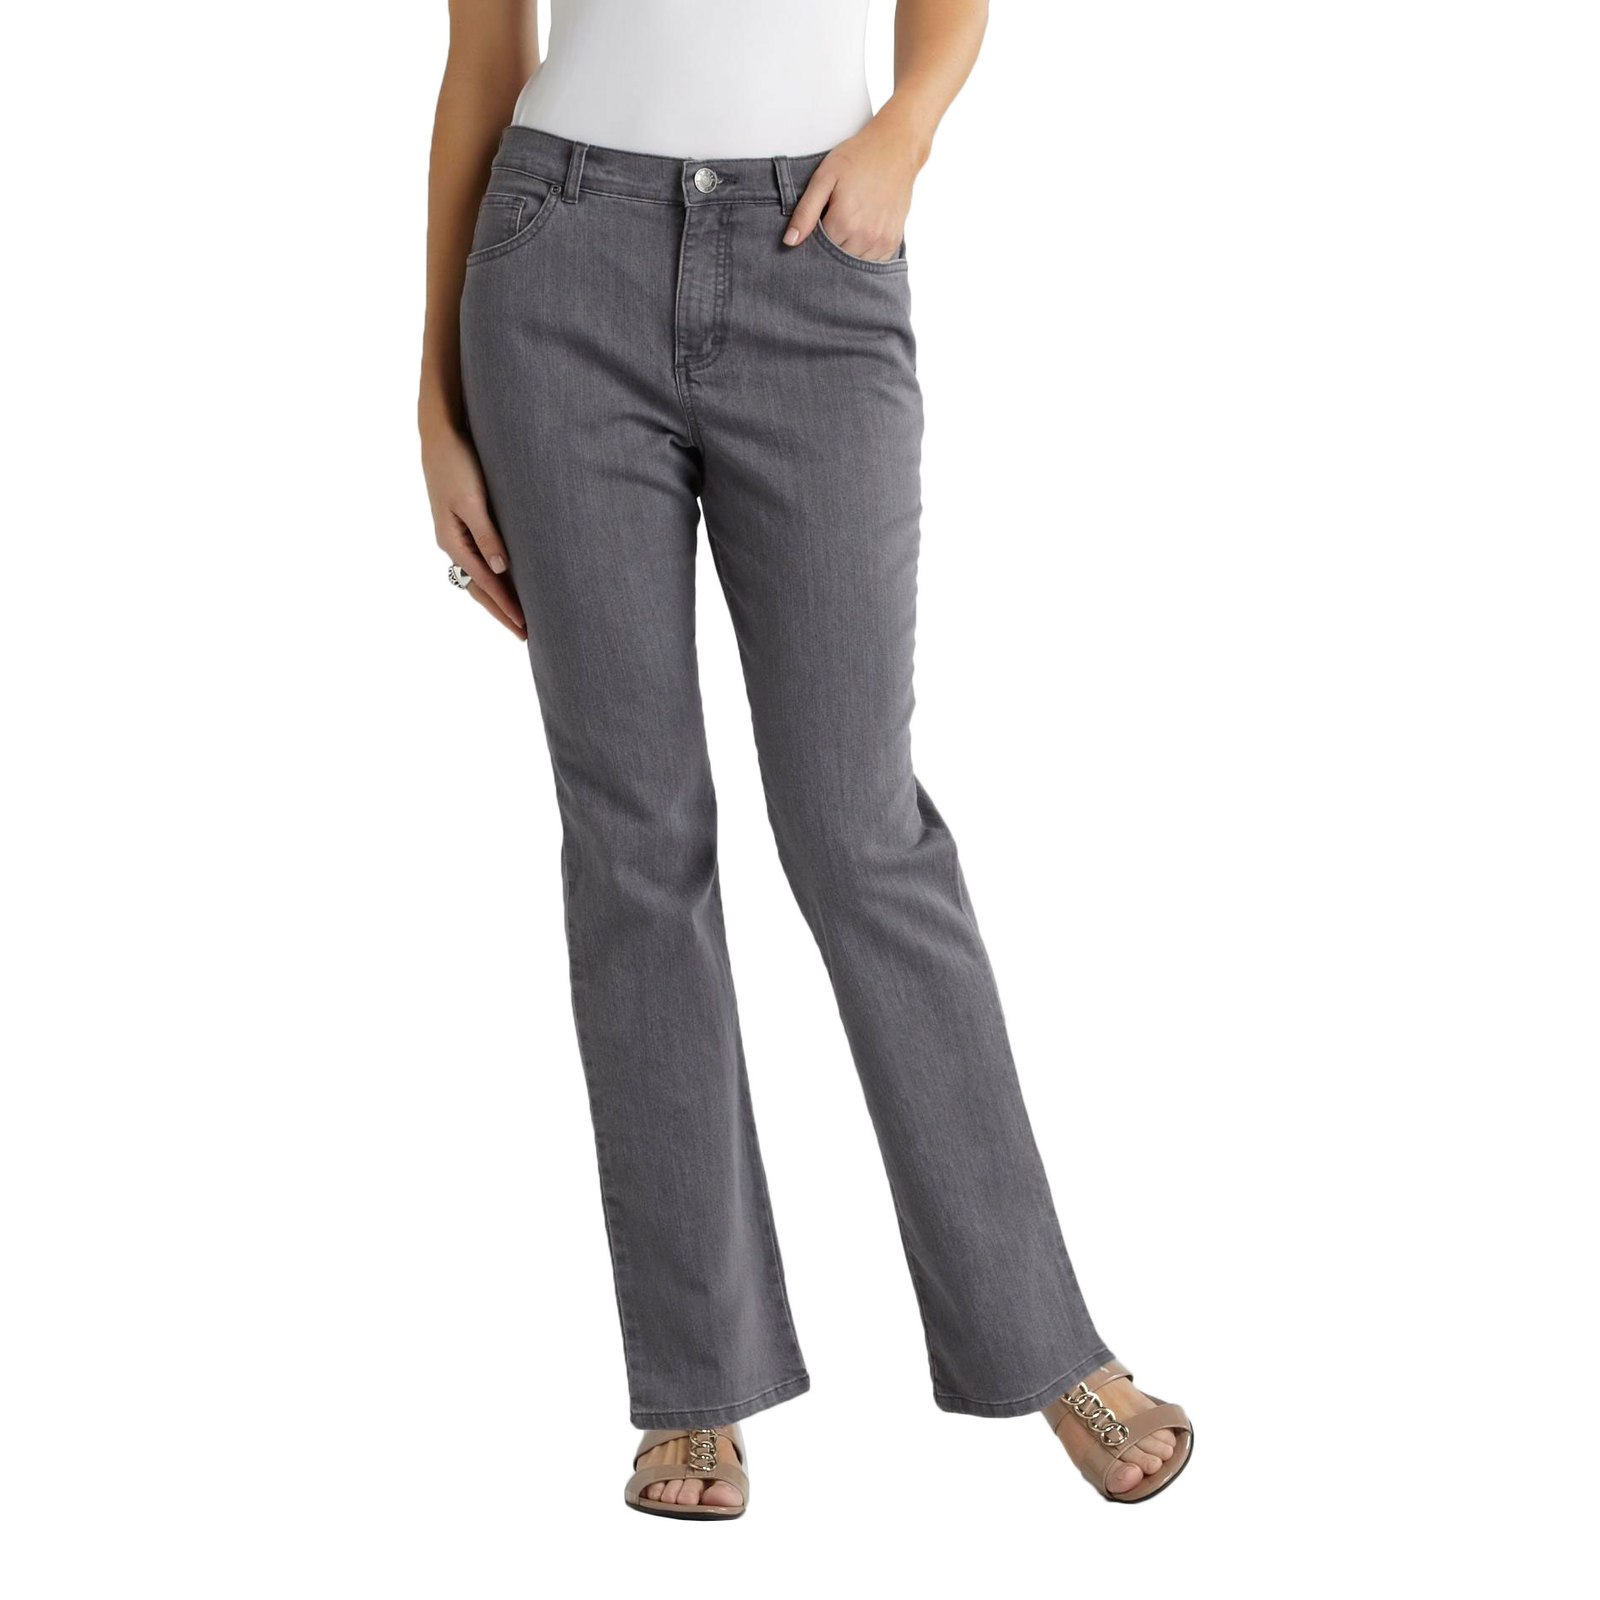 Basic Editions Women's Classic-Fit Jeans